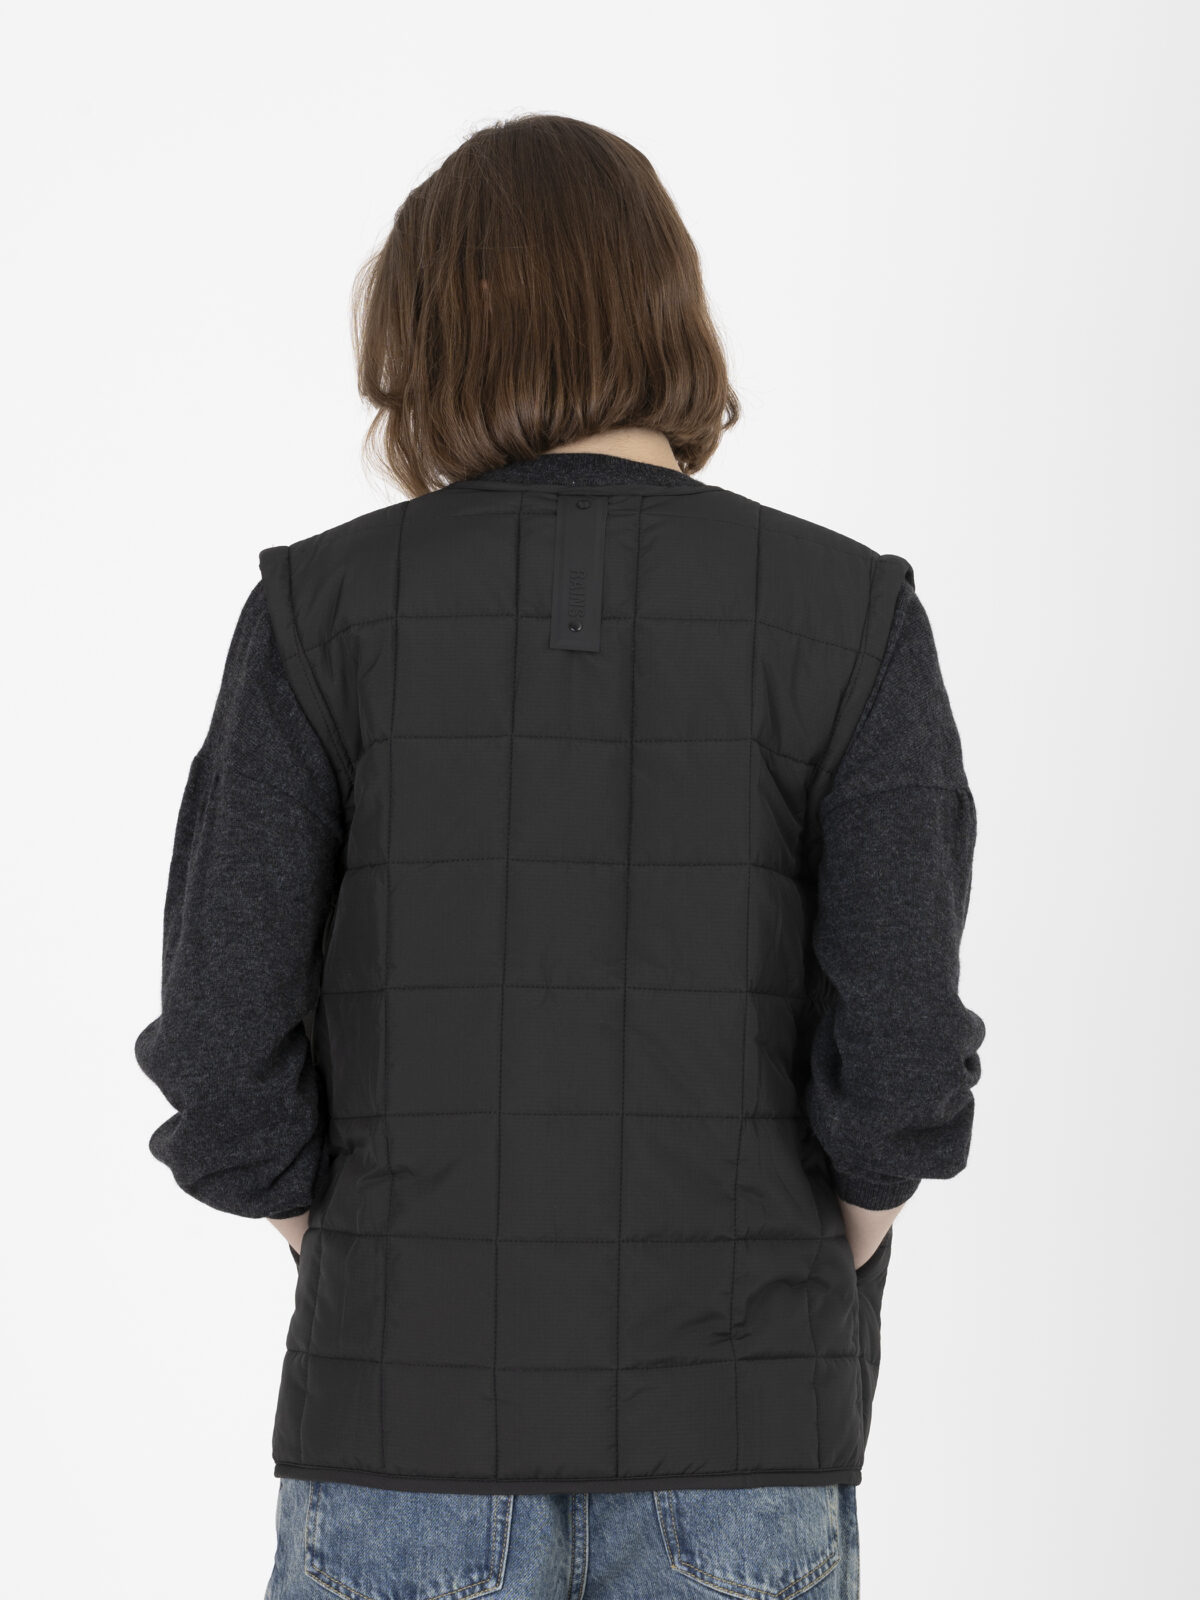 liner-vest-quilted-black-outerwear-layer-rains-mathcboxathens